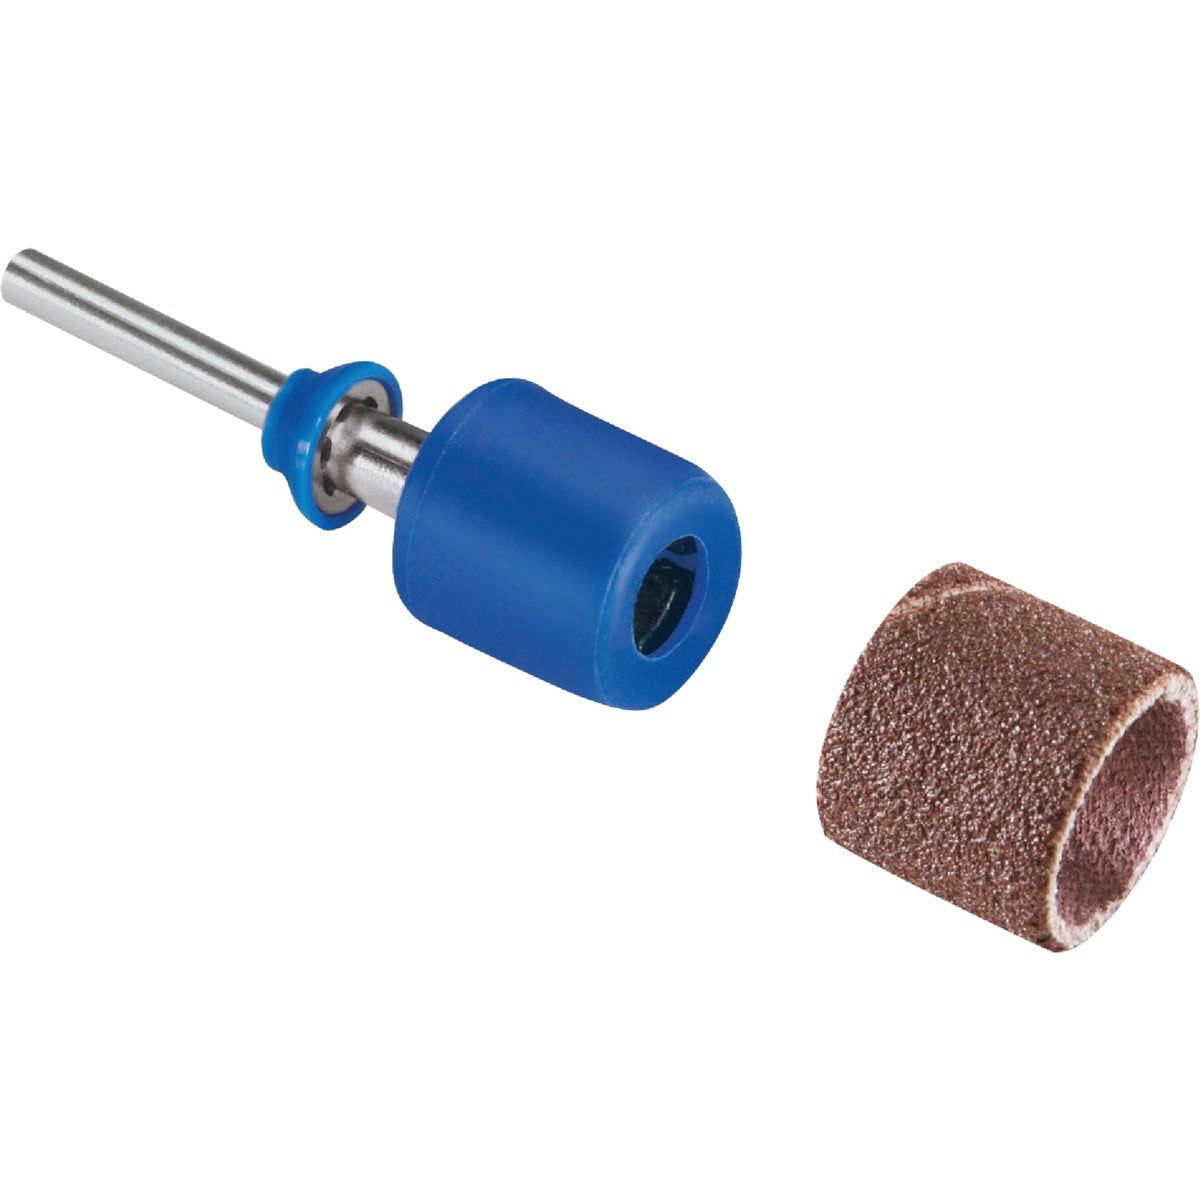 Item 301512, EZ Drum mandrel makes sanding band changes easy as pull, place and secure.